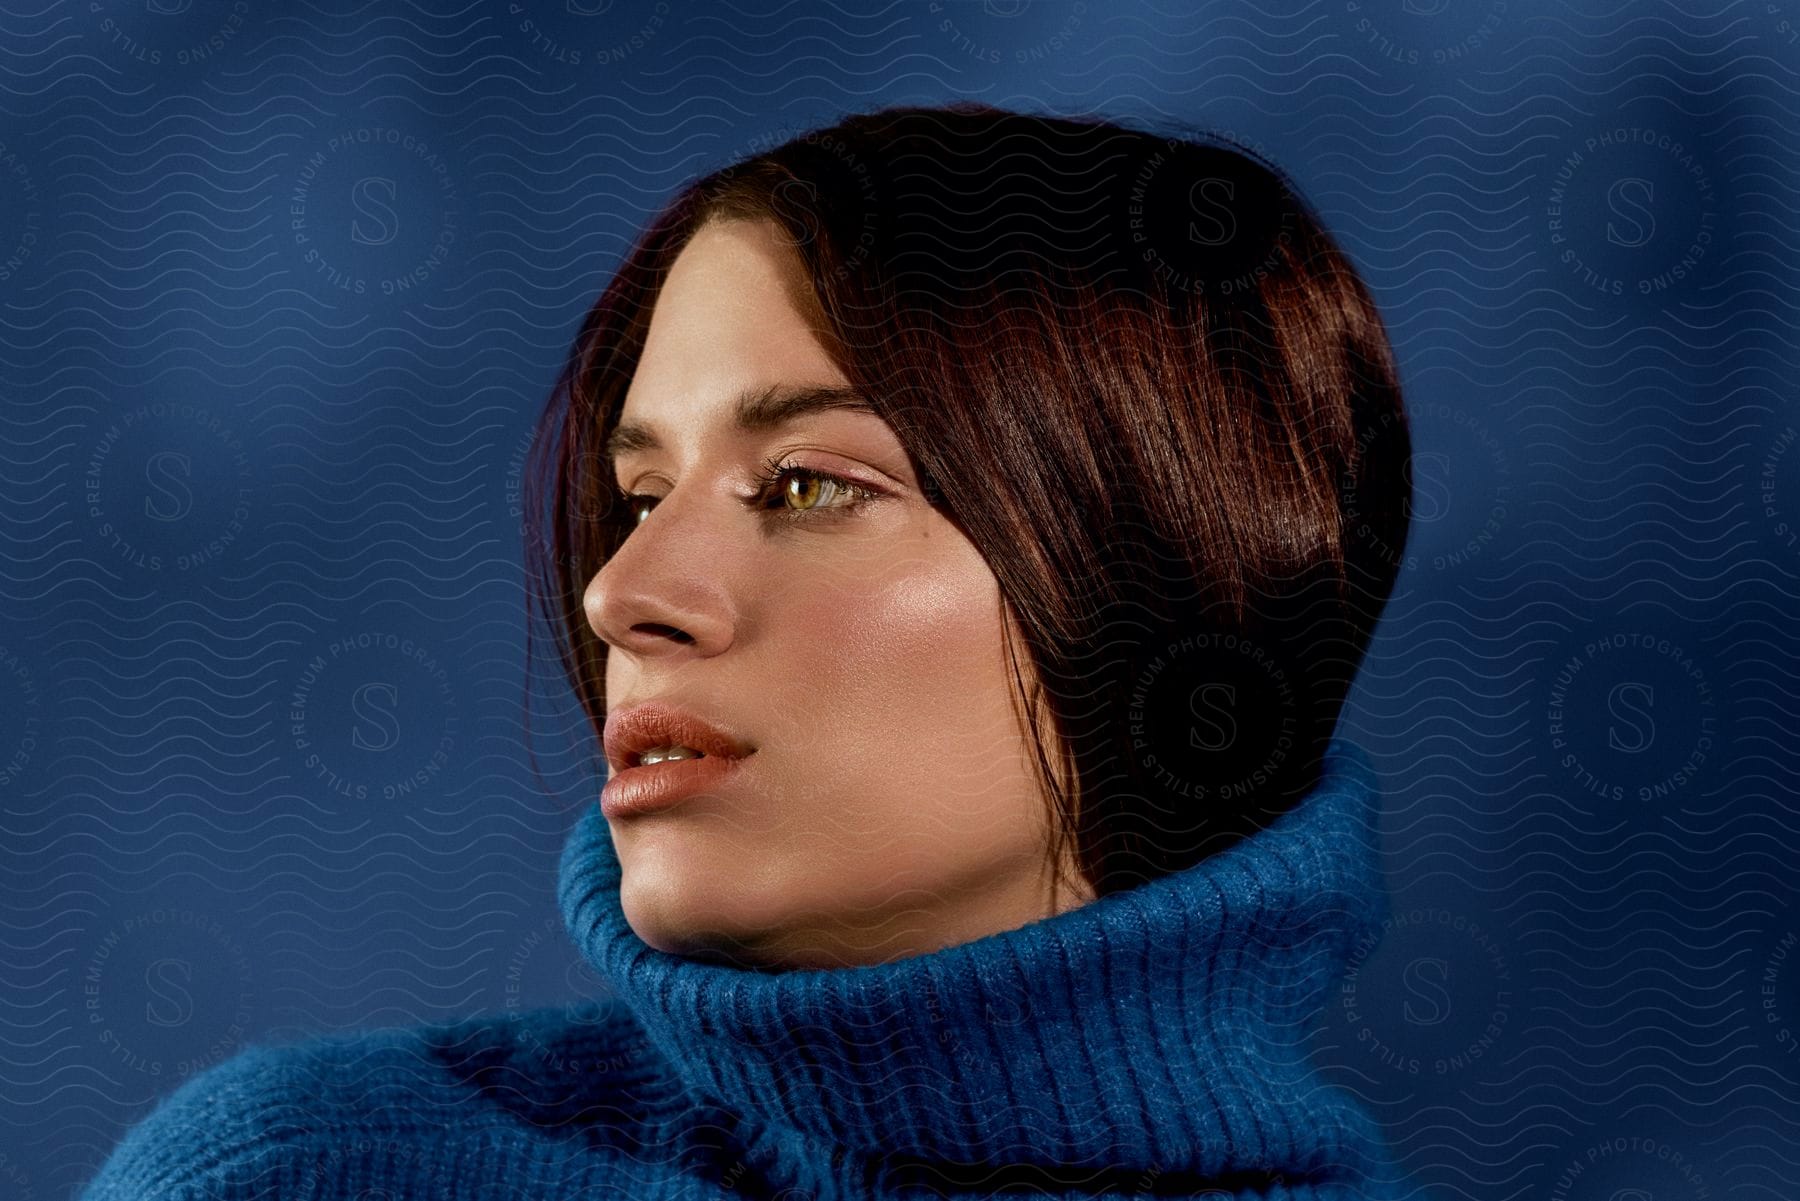 Profile of a woman with dark hair in a blue turtleneck against a blue background.